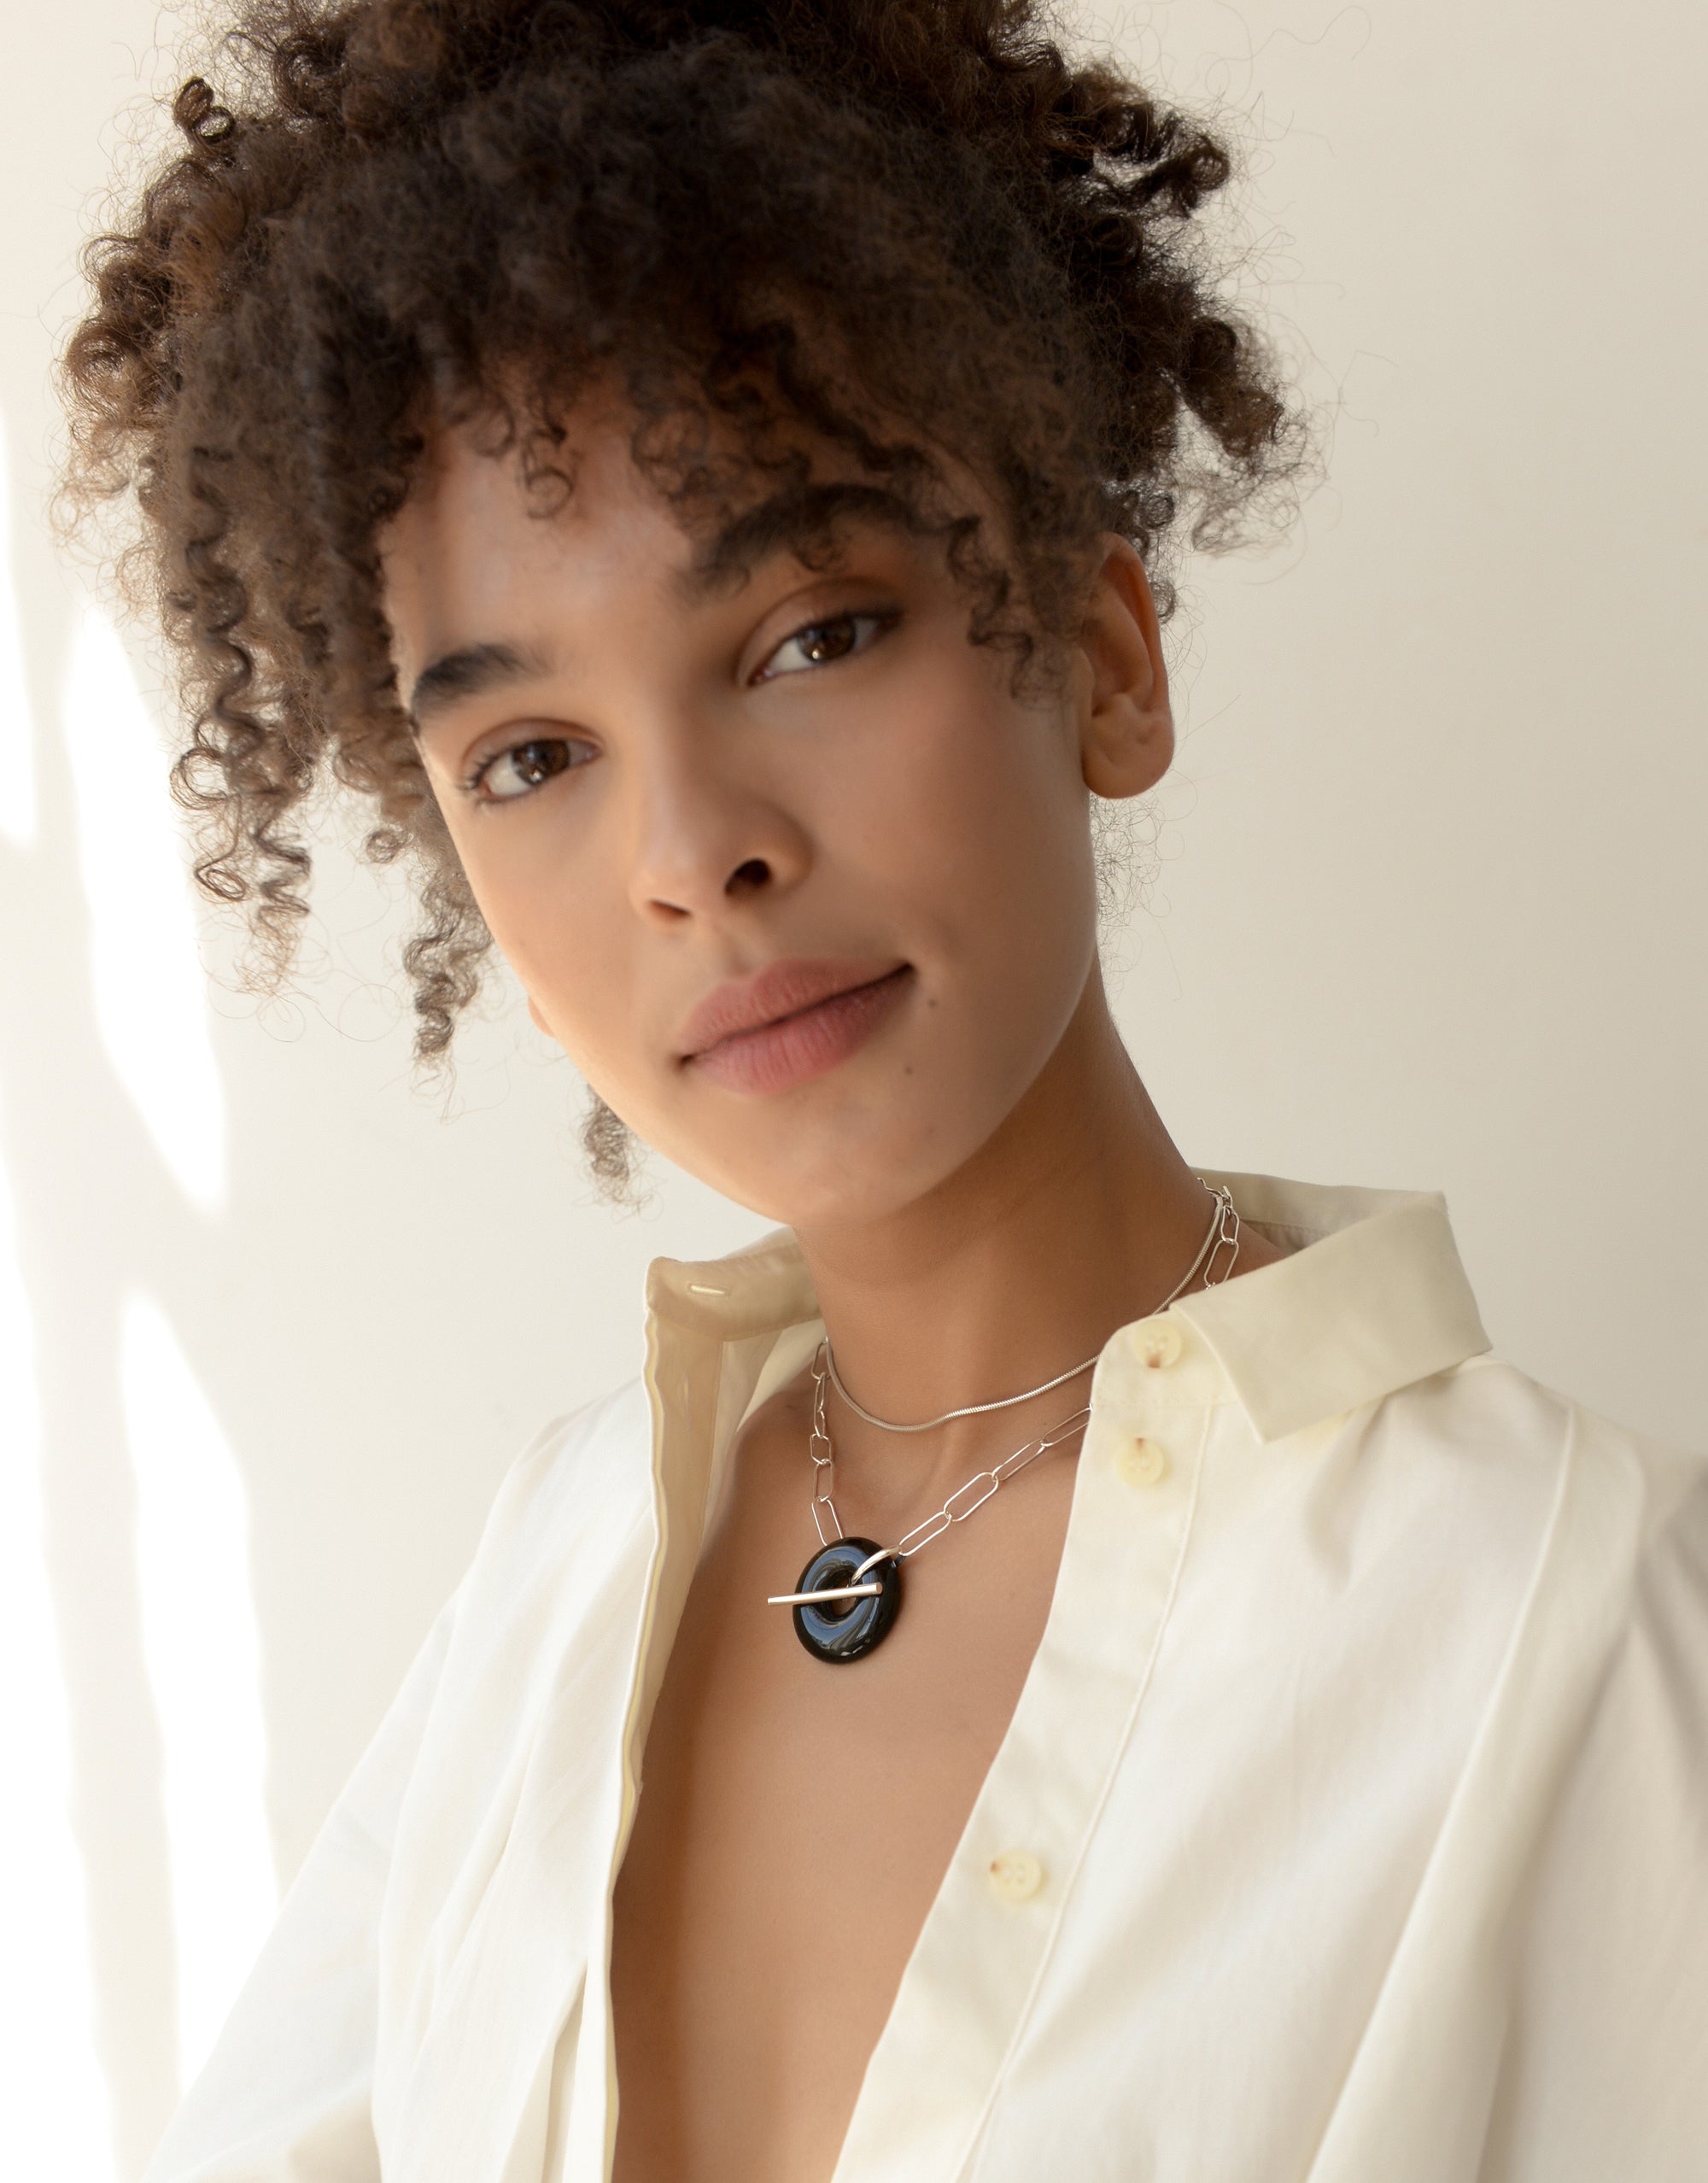 CLED Eco Conscious Sustainable upcycled jewelry made from Eco Gems and sterling silver from recycled glass | The Day Torus Necklace